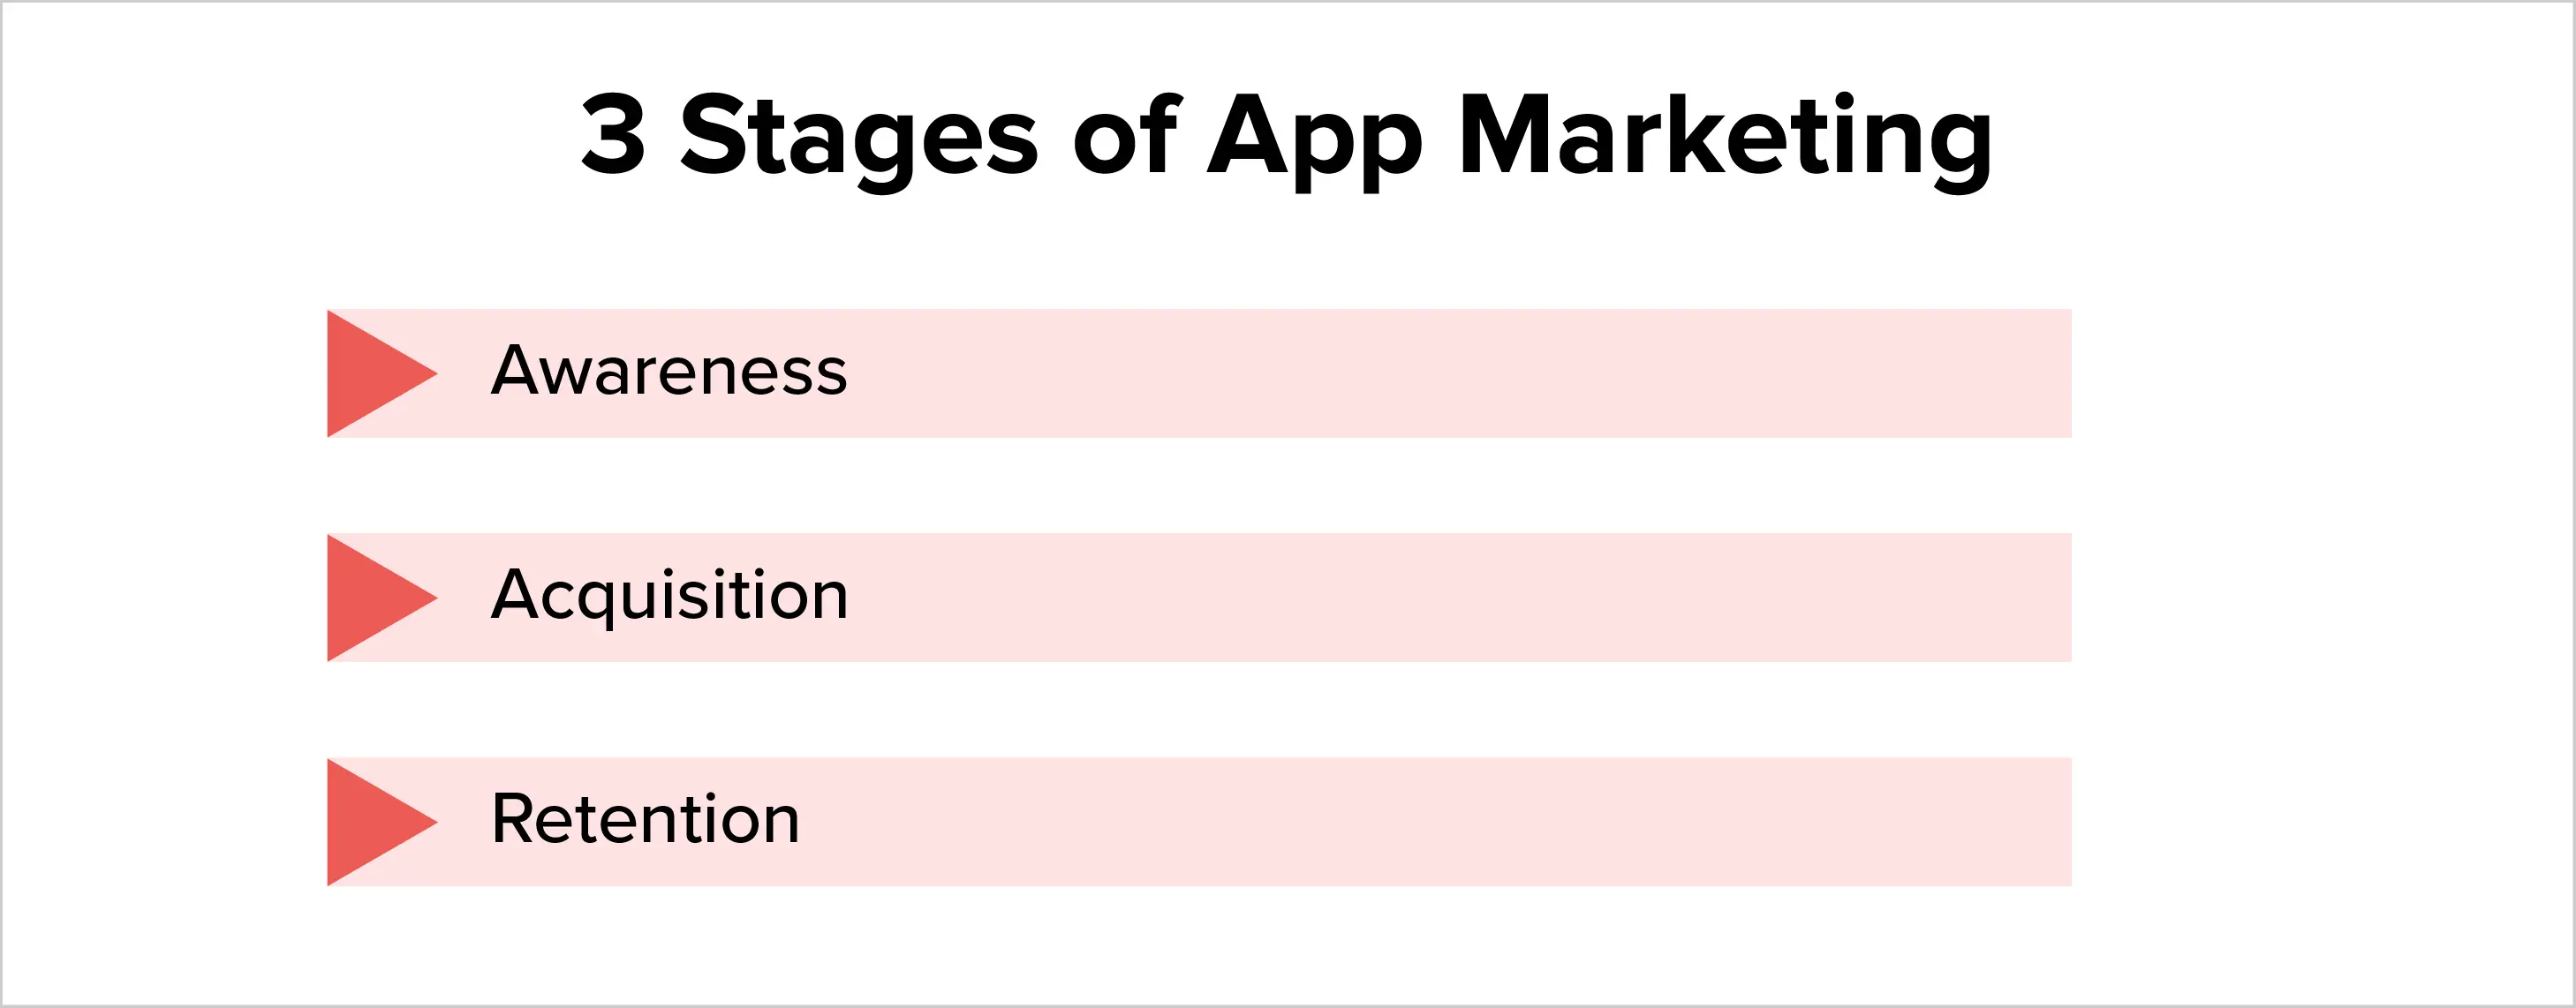 stages of mobile app marketing 